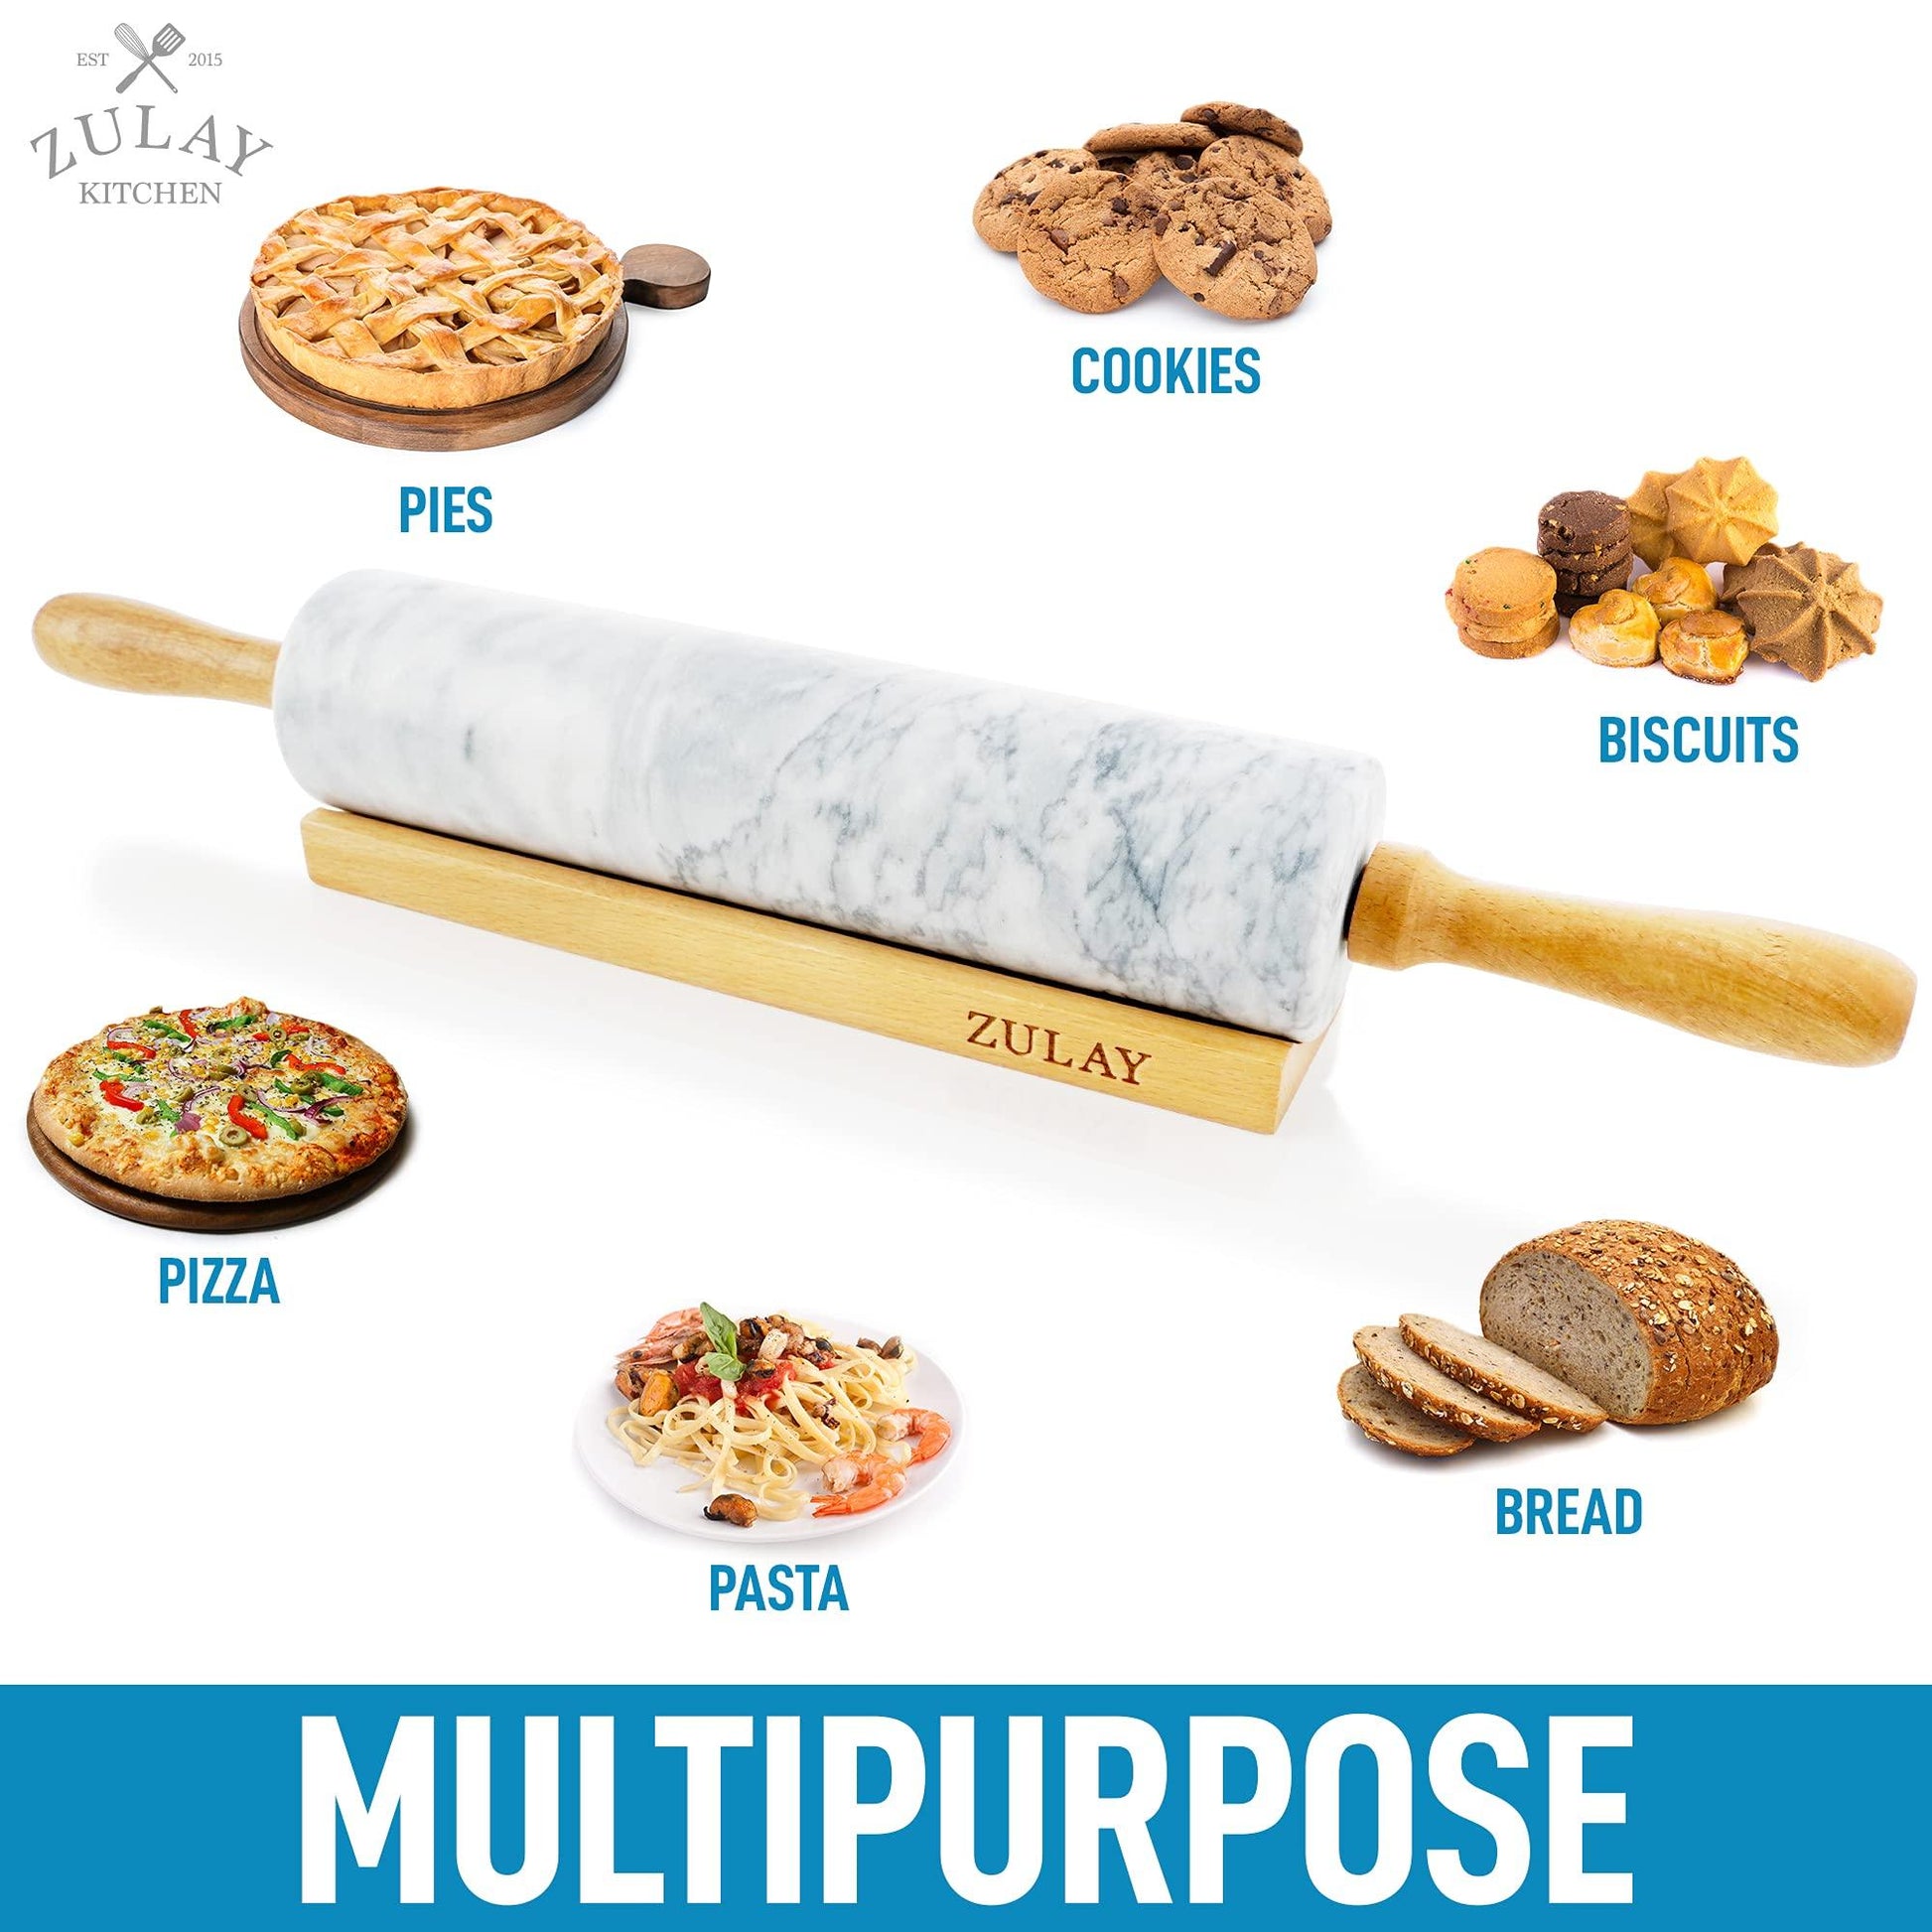 Zulay Kitchen 17-Inch Marble Rolling Pin With Stand - Polished Marble Rolling Pins For Baking - Long Rolling Pin Marble With Beechwood Handle - Non-stick Roller Pin For Baking Pastries, Bread & Pizza - CookCave